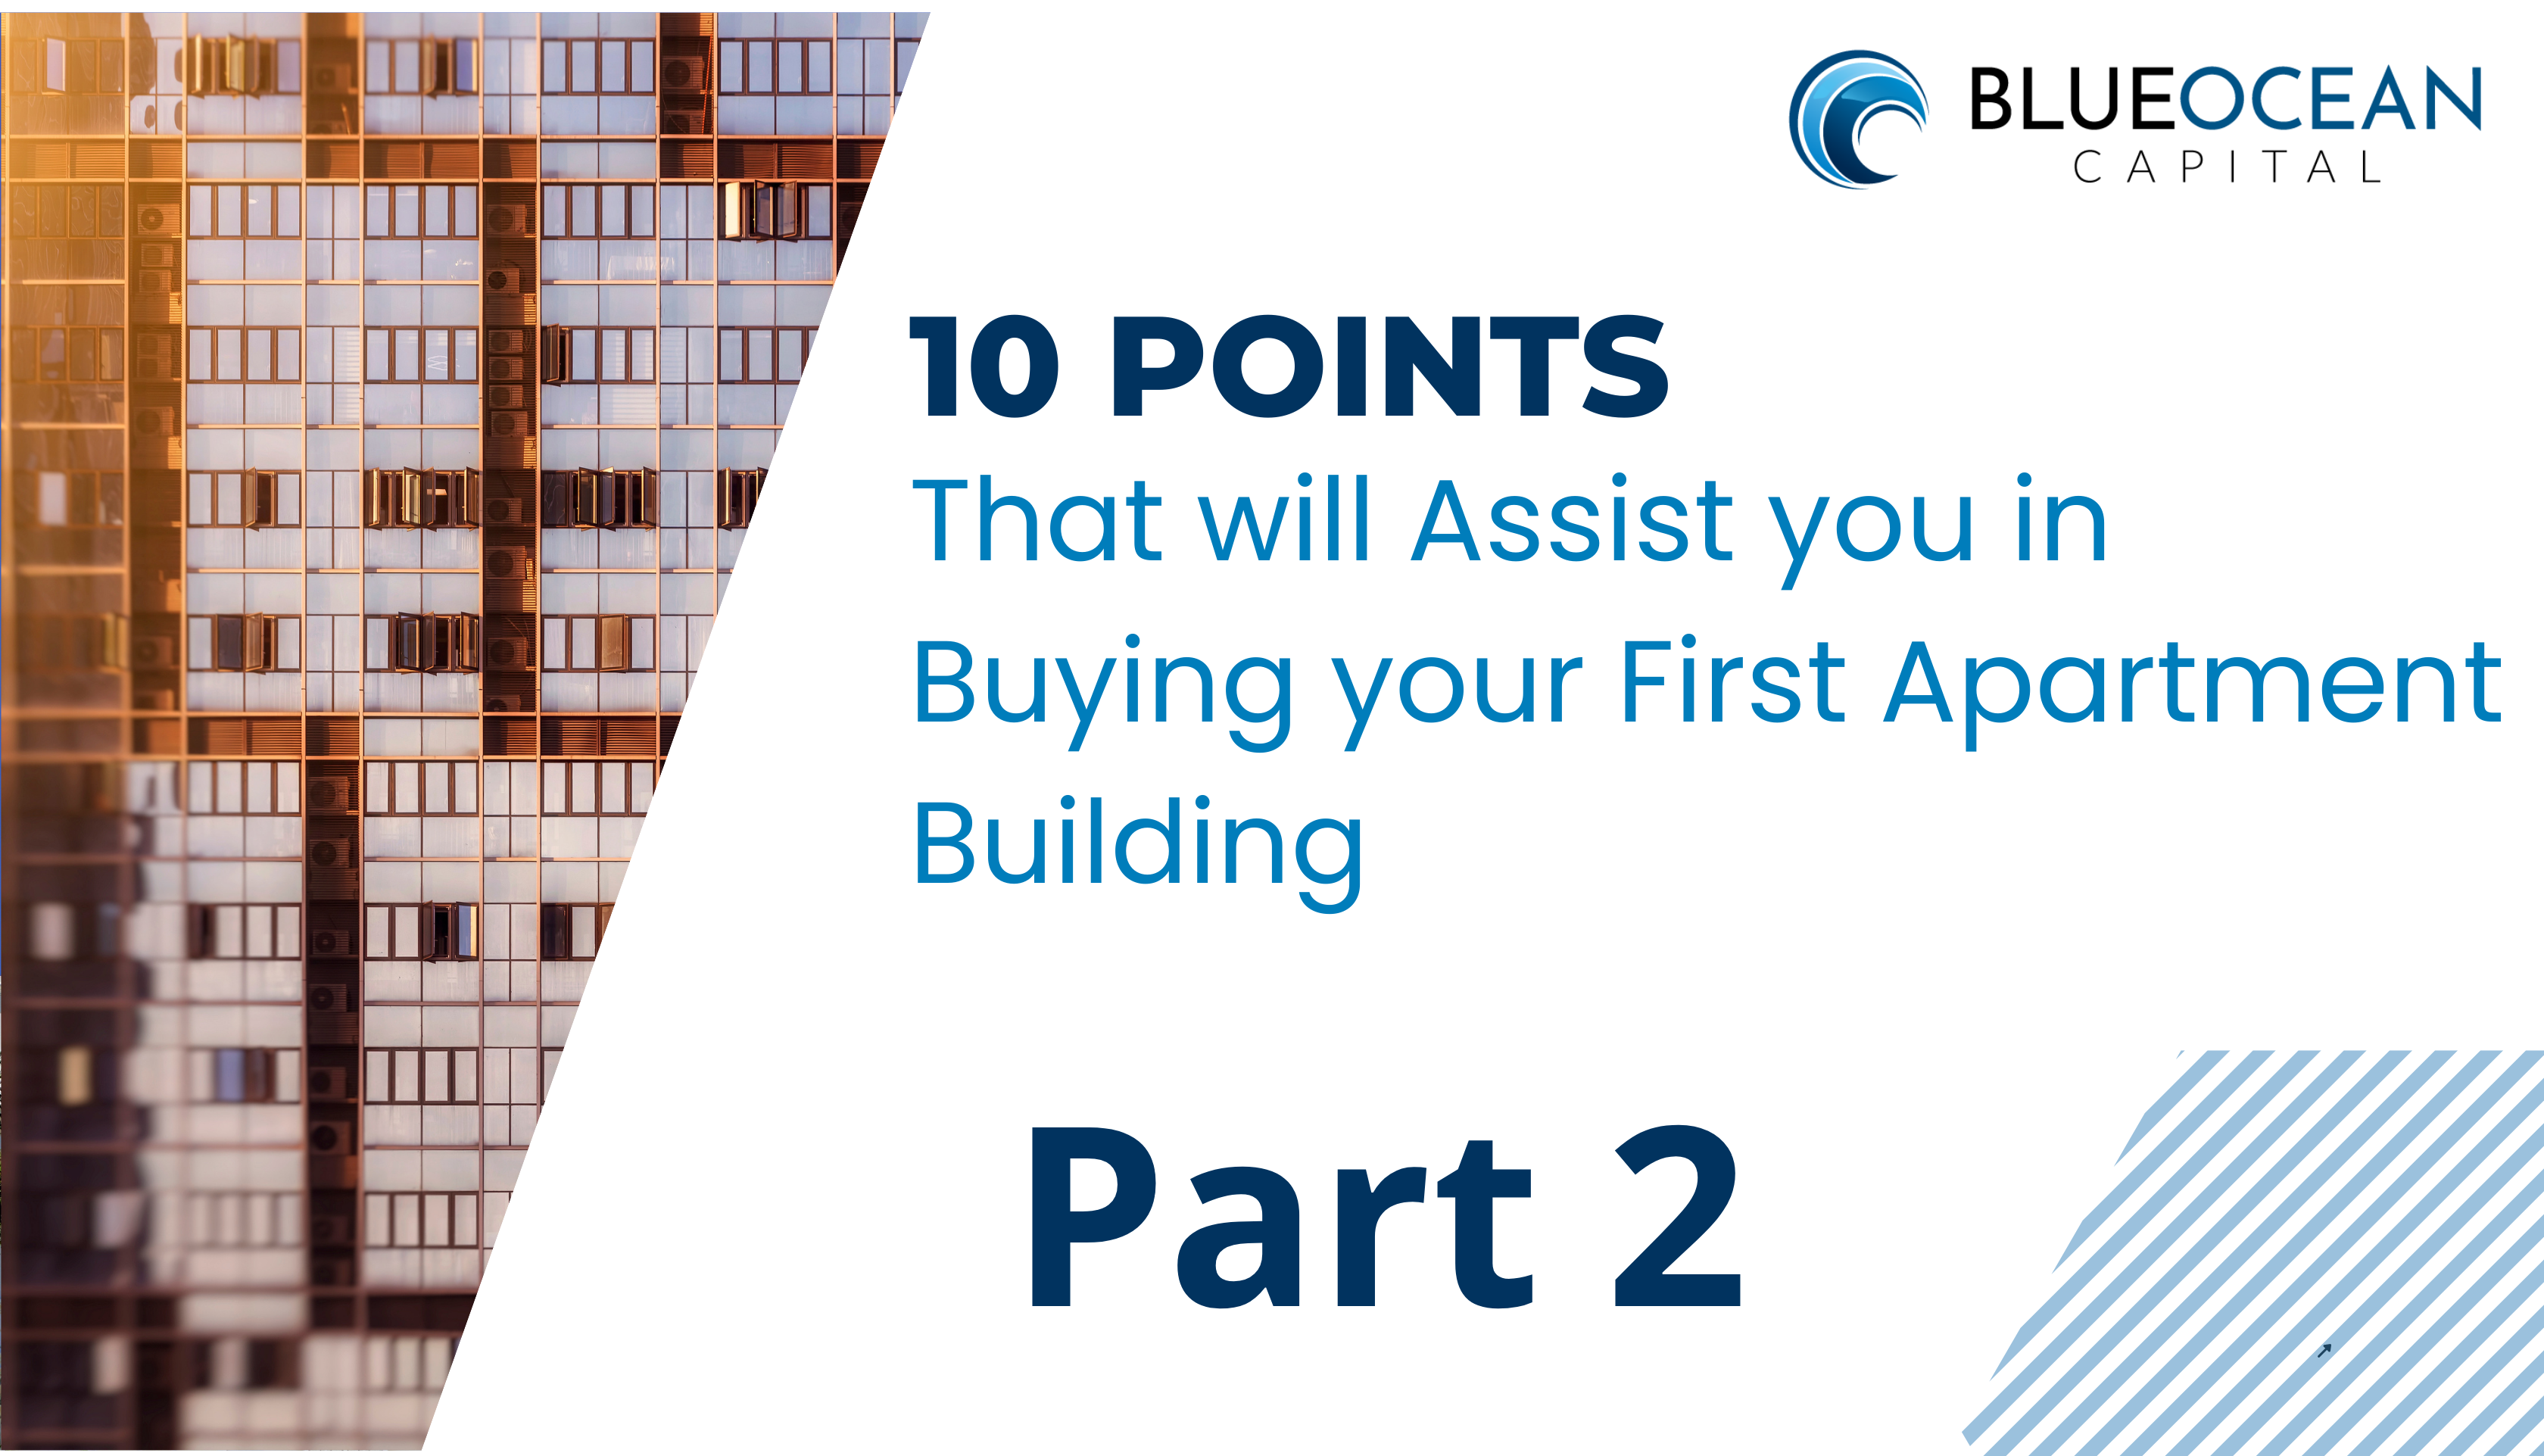 10 points that will assist you in buying your First Apartment Building- Part 2